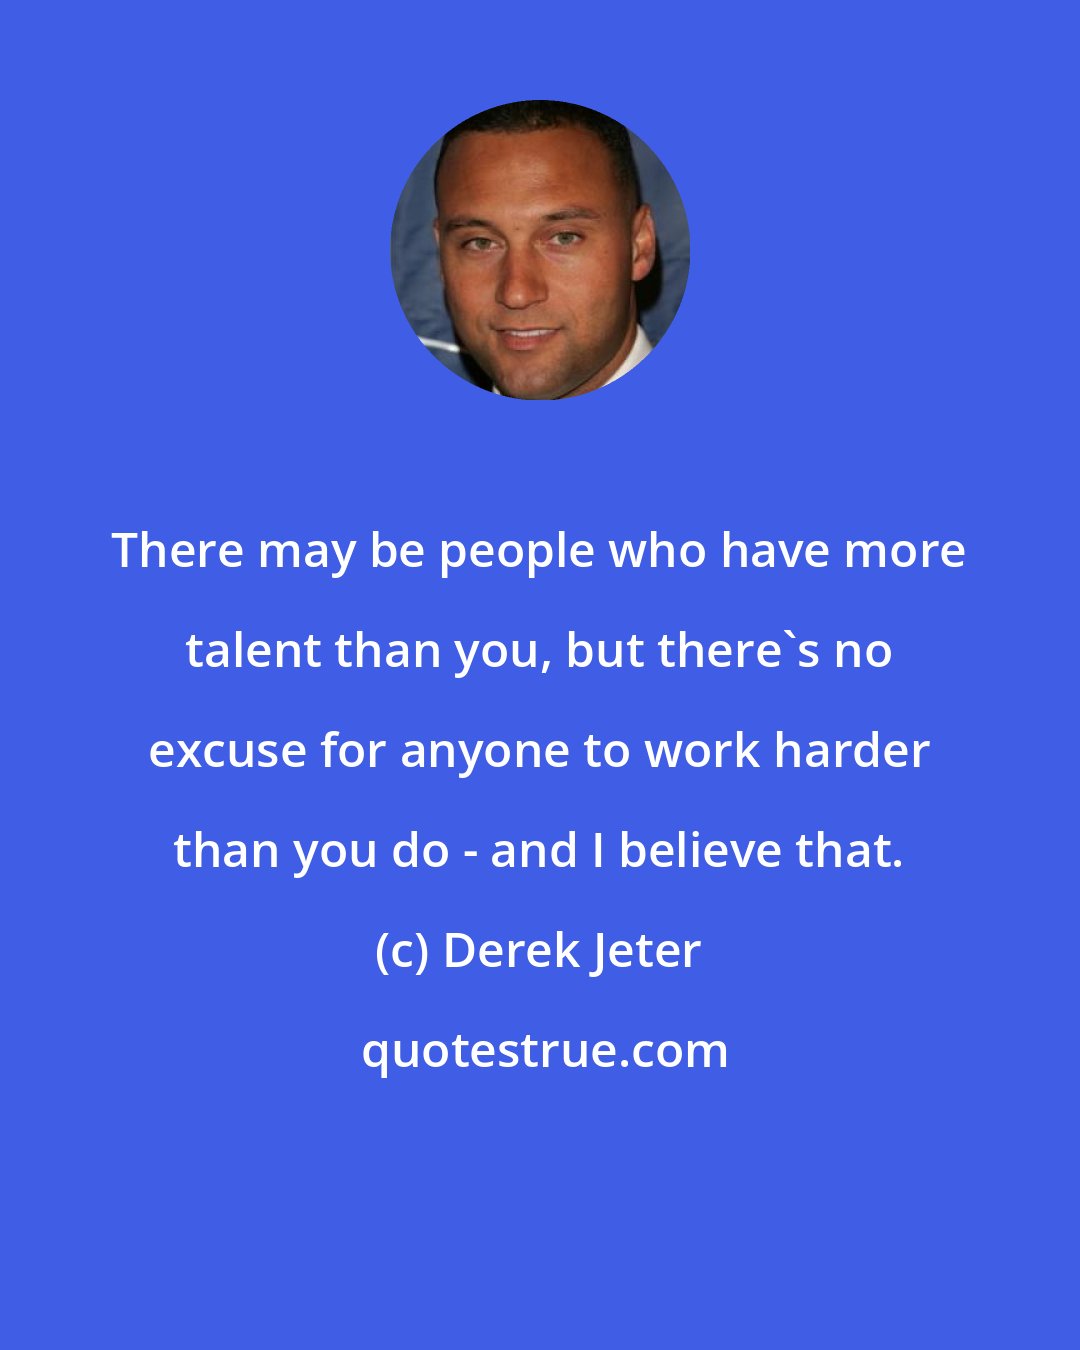 Derek Jeter: There may be people who have more talent than you, but there's no excuse for anyone to work harder than you do - and I believe that.